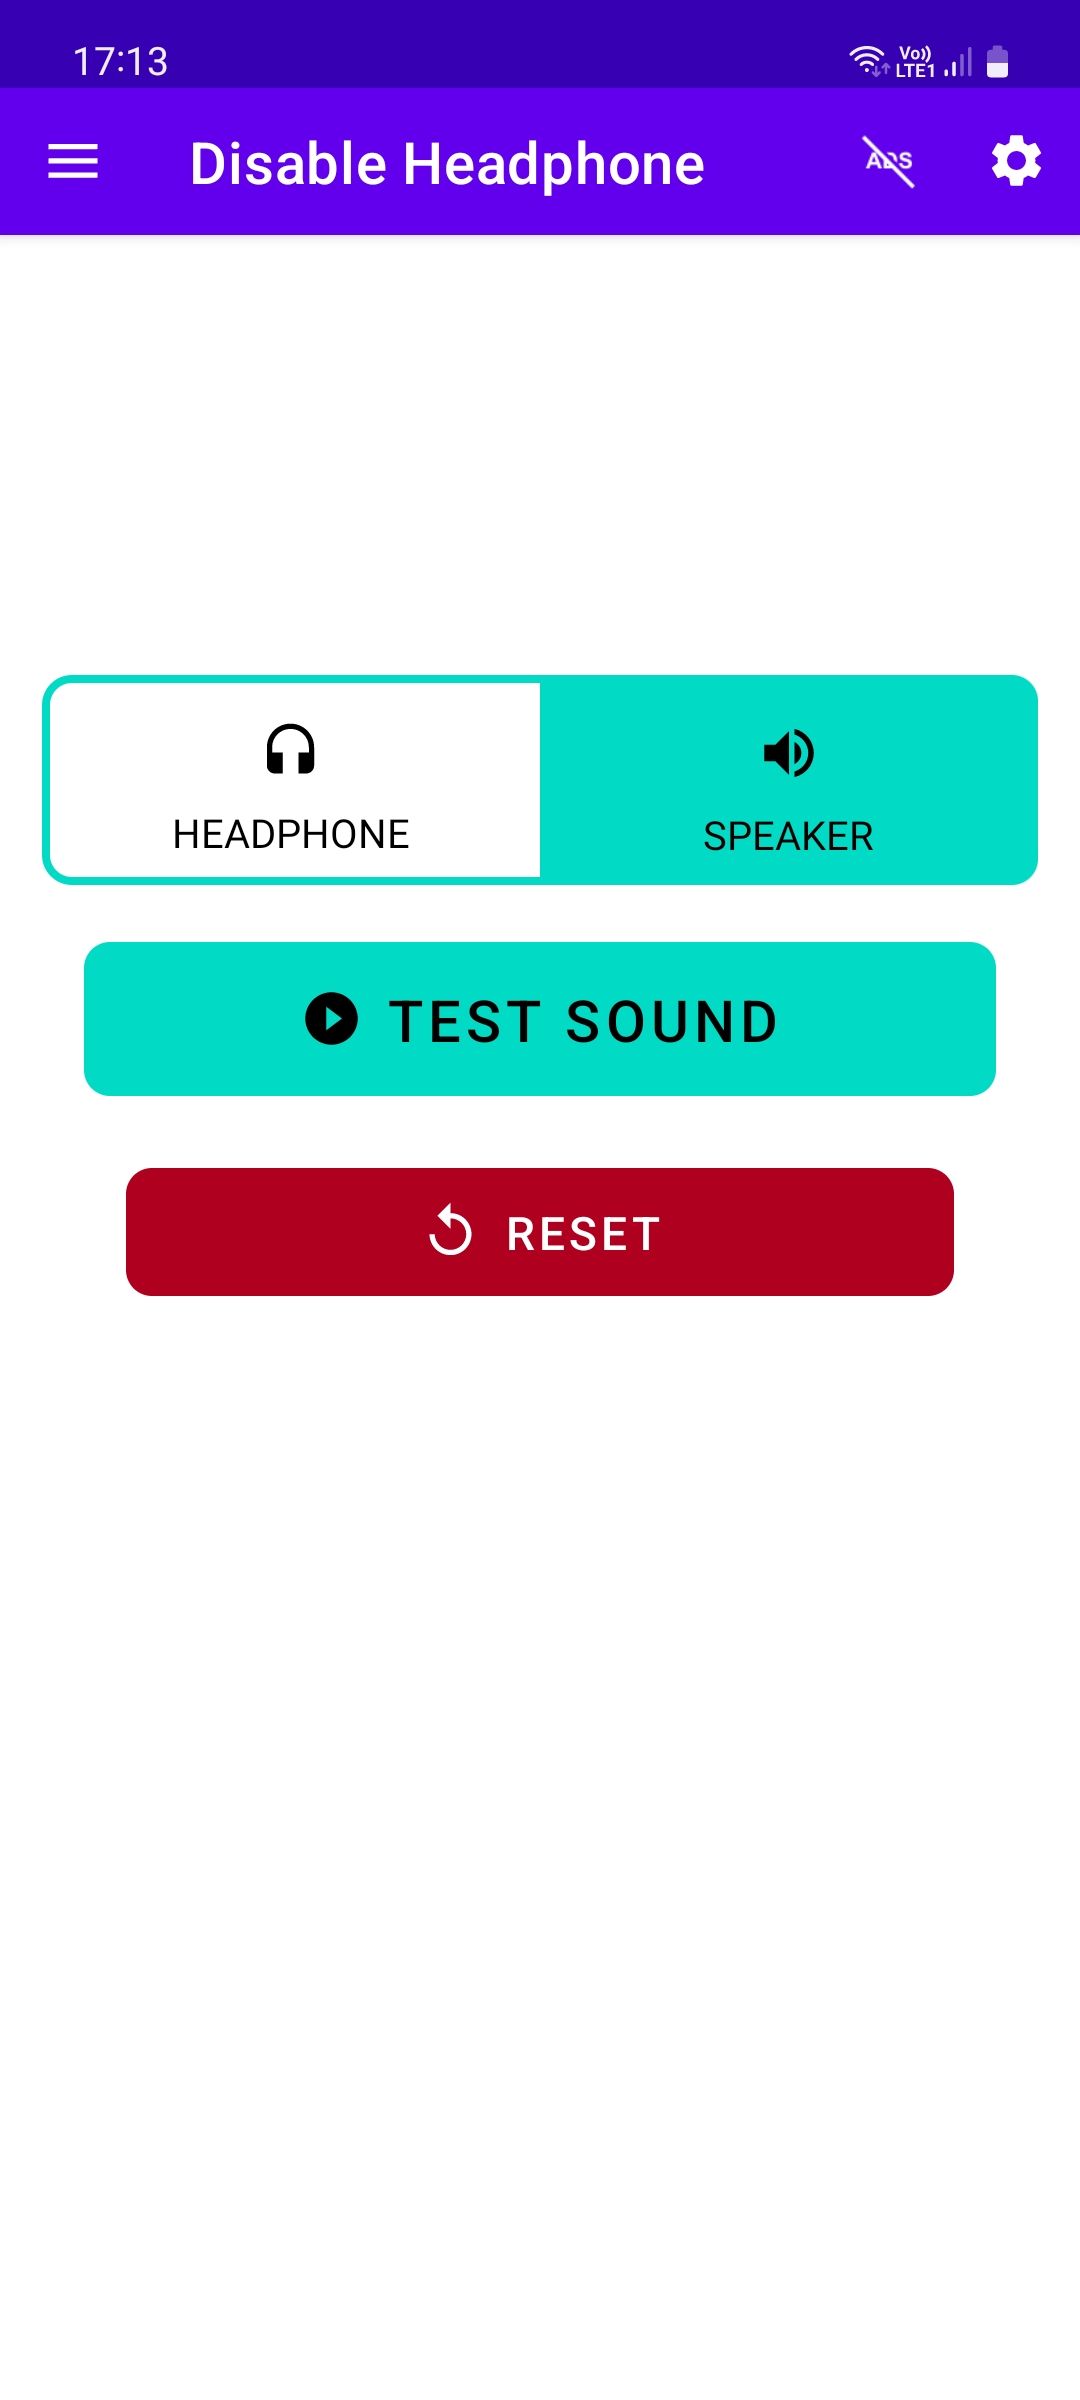 Disable Headphone app main page